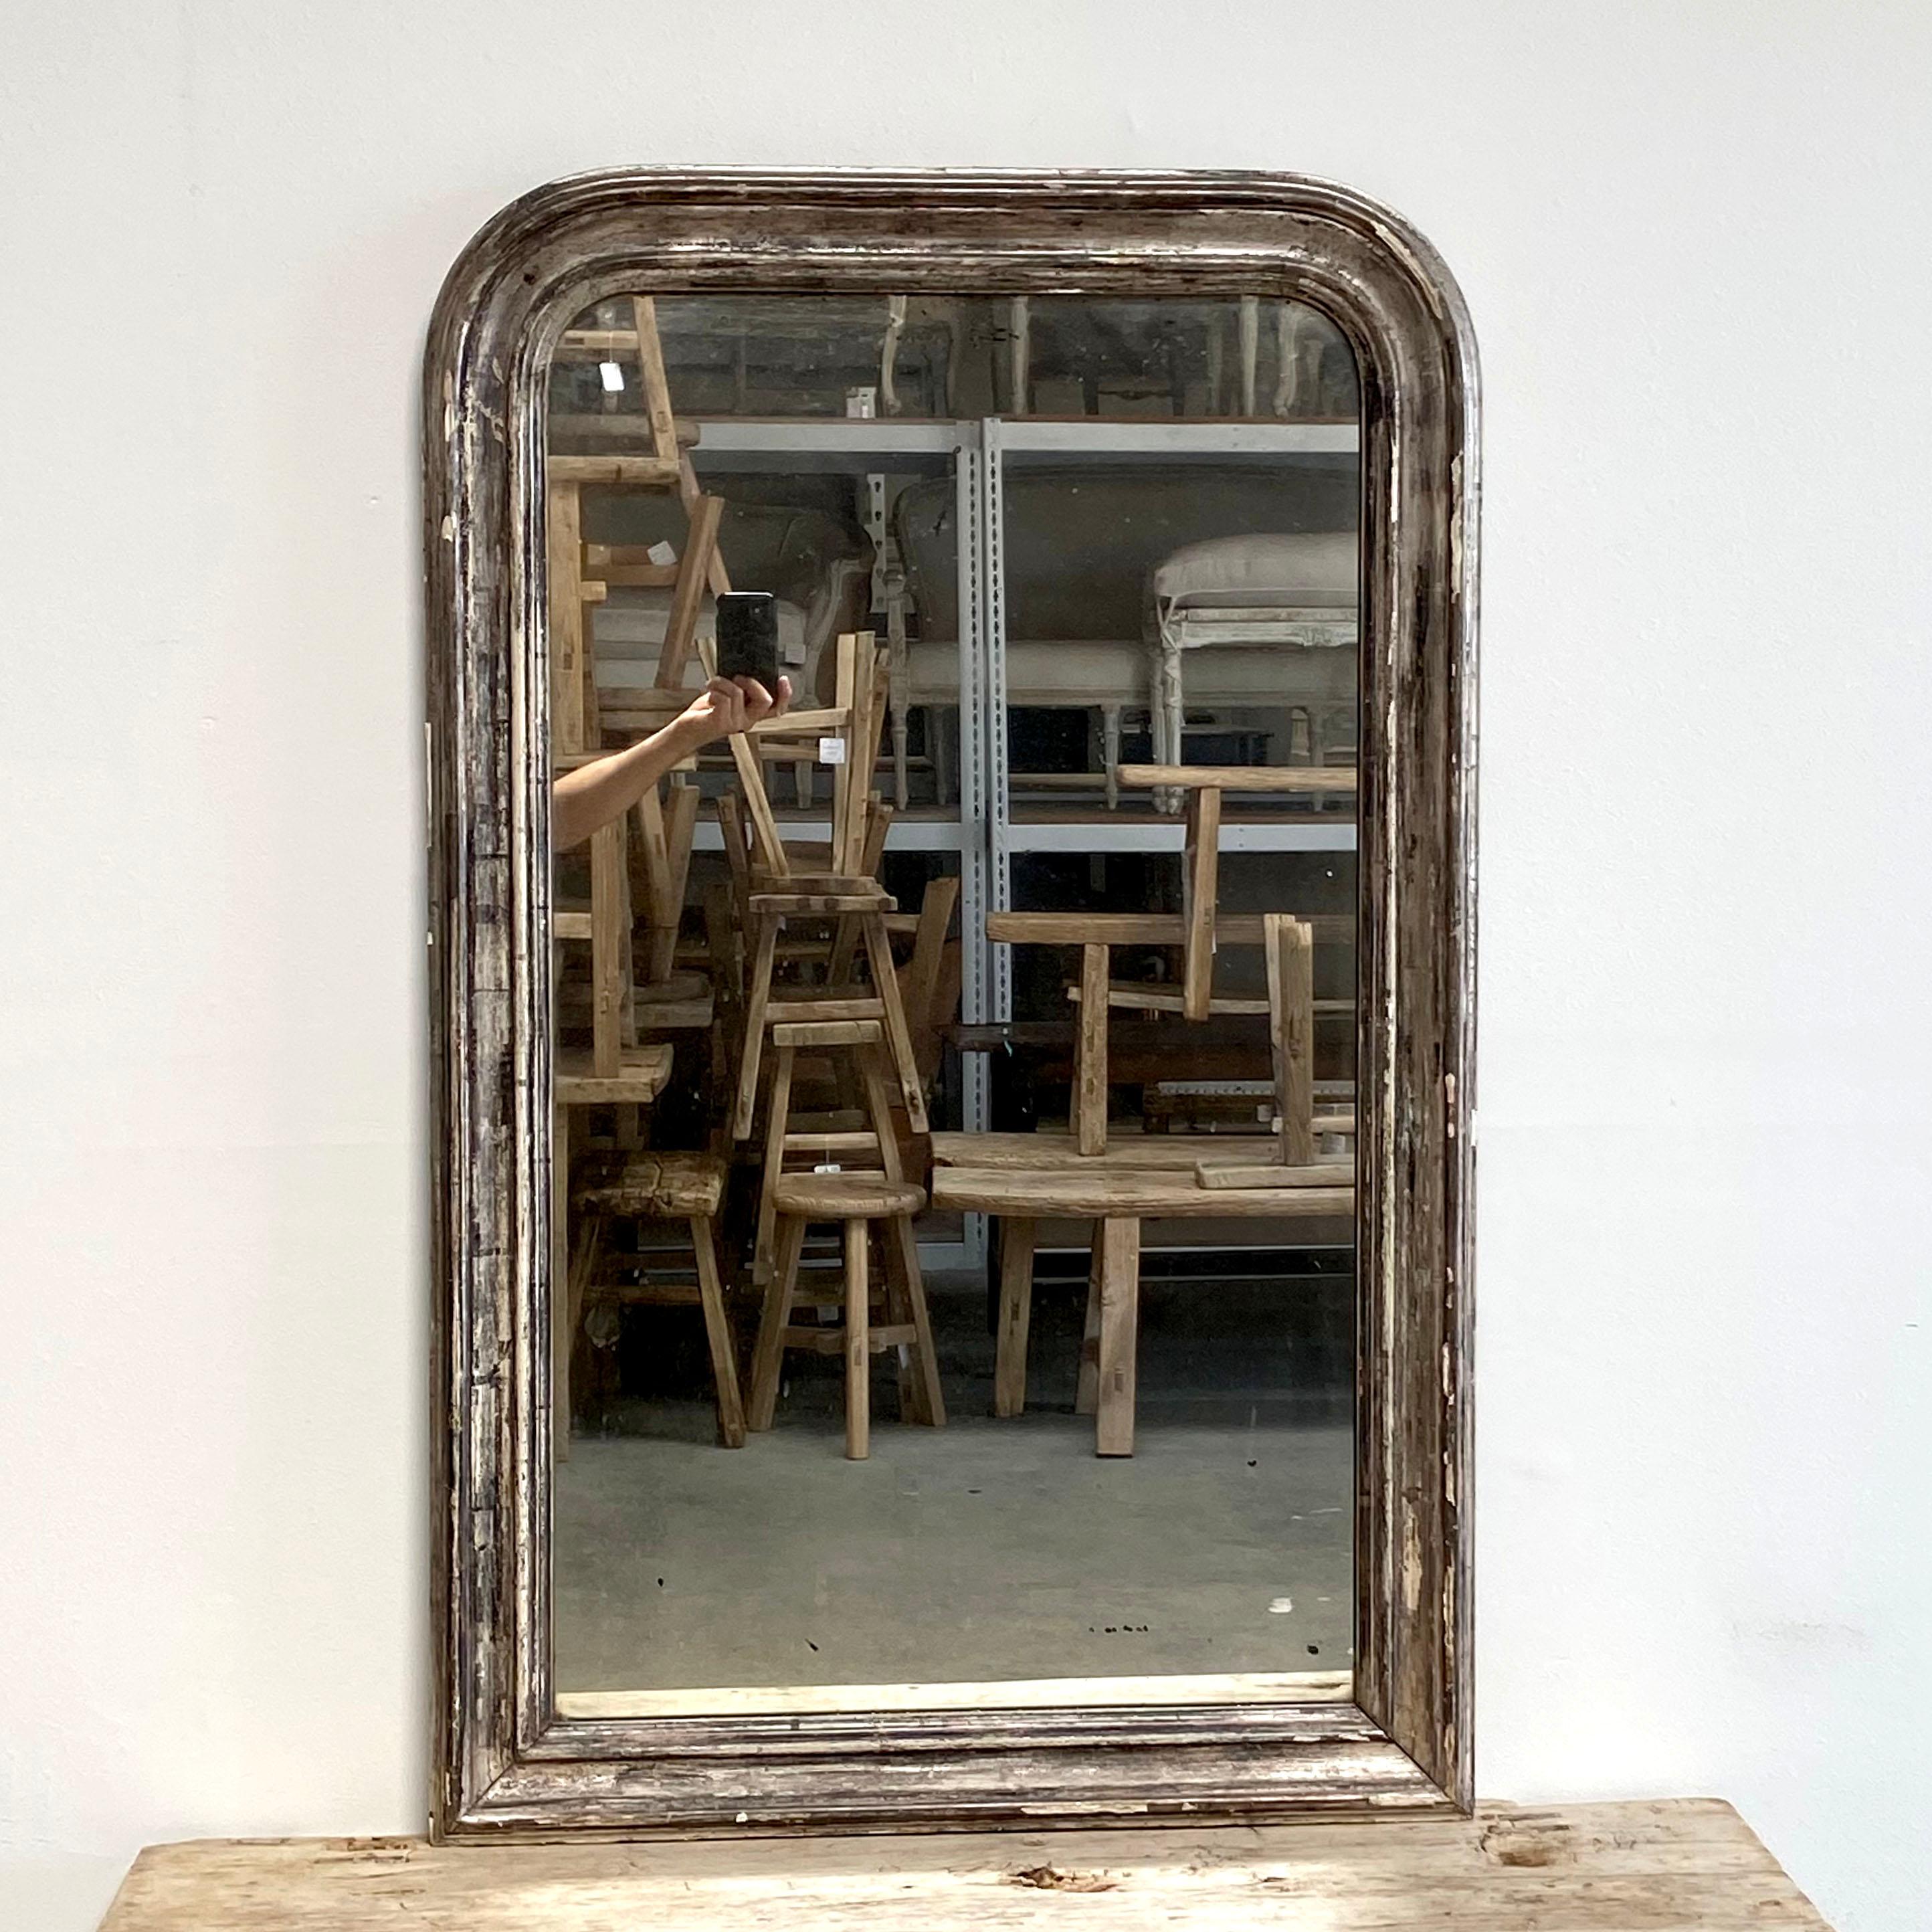 Louis Phillipe mirror with silver antique finish, lots of patina.
Frame is solid and sturdy, ready for hanging, or lean up on a table.

Measures: 28.5